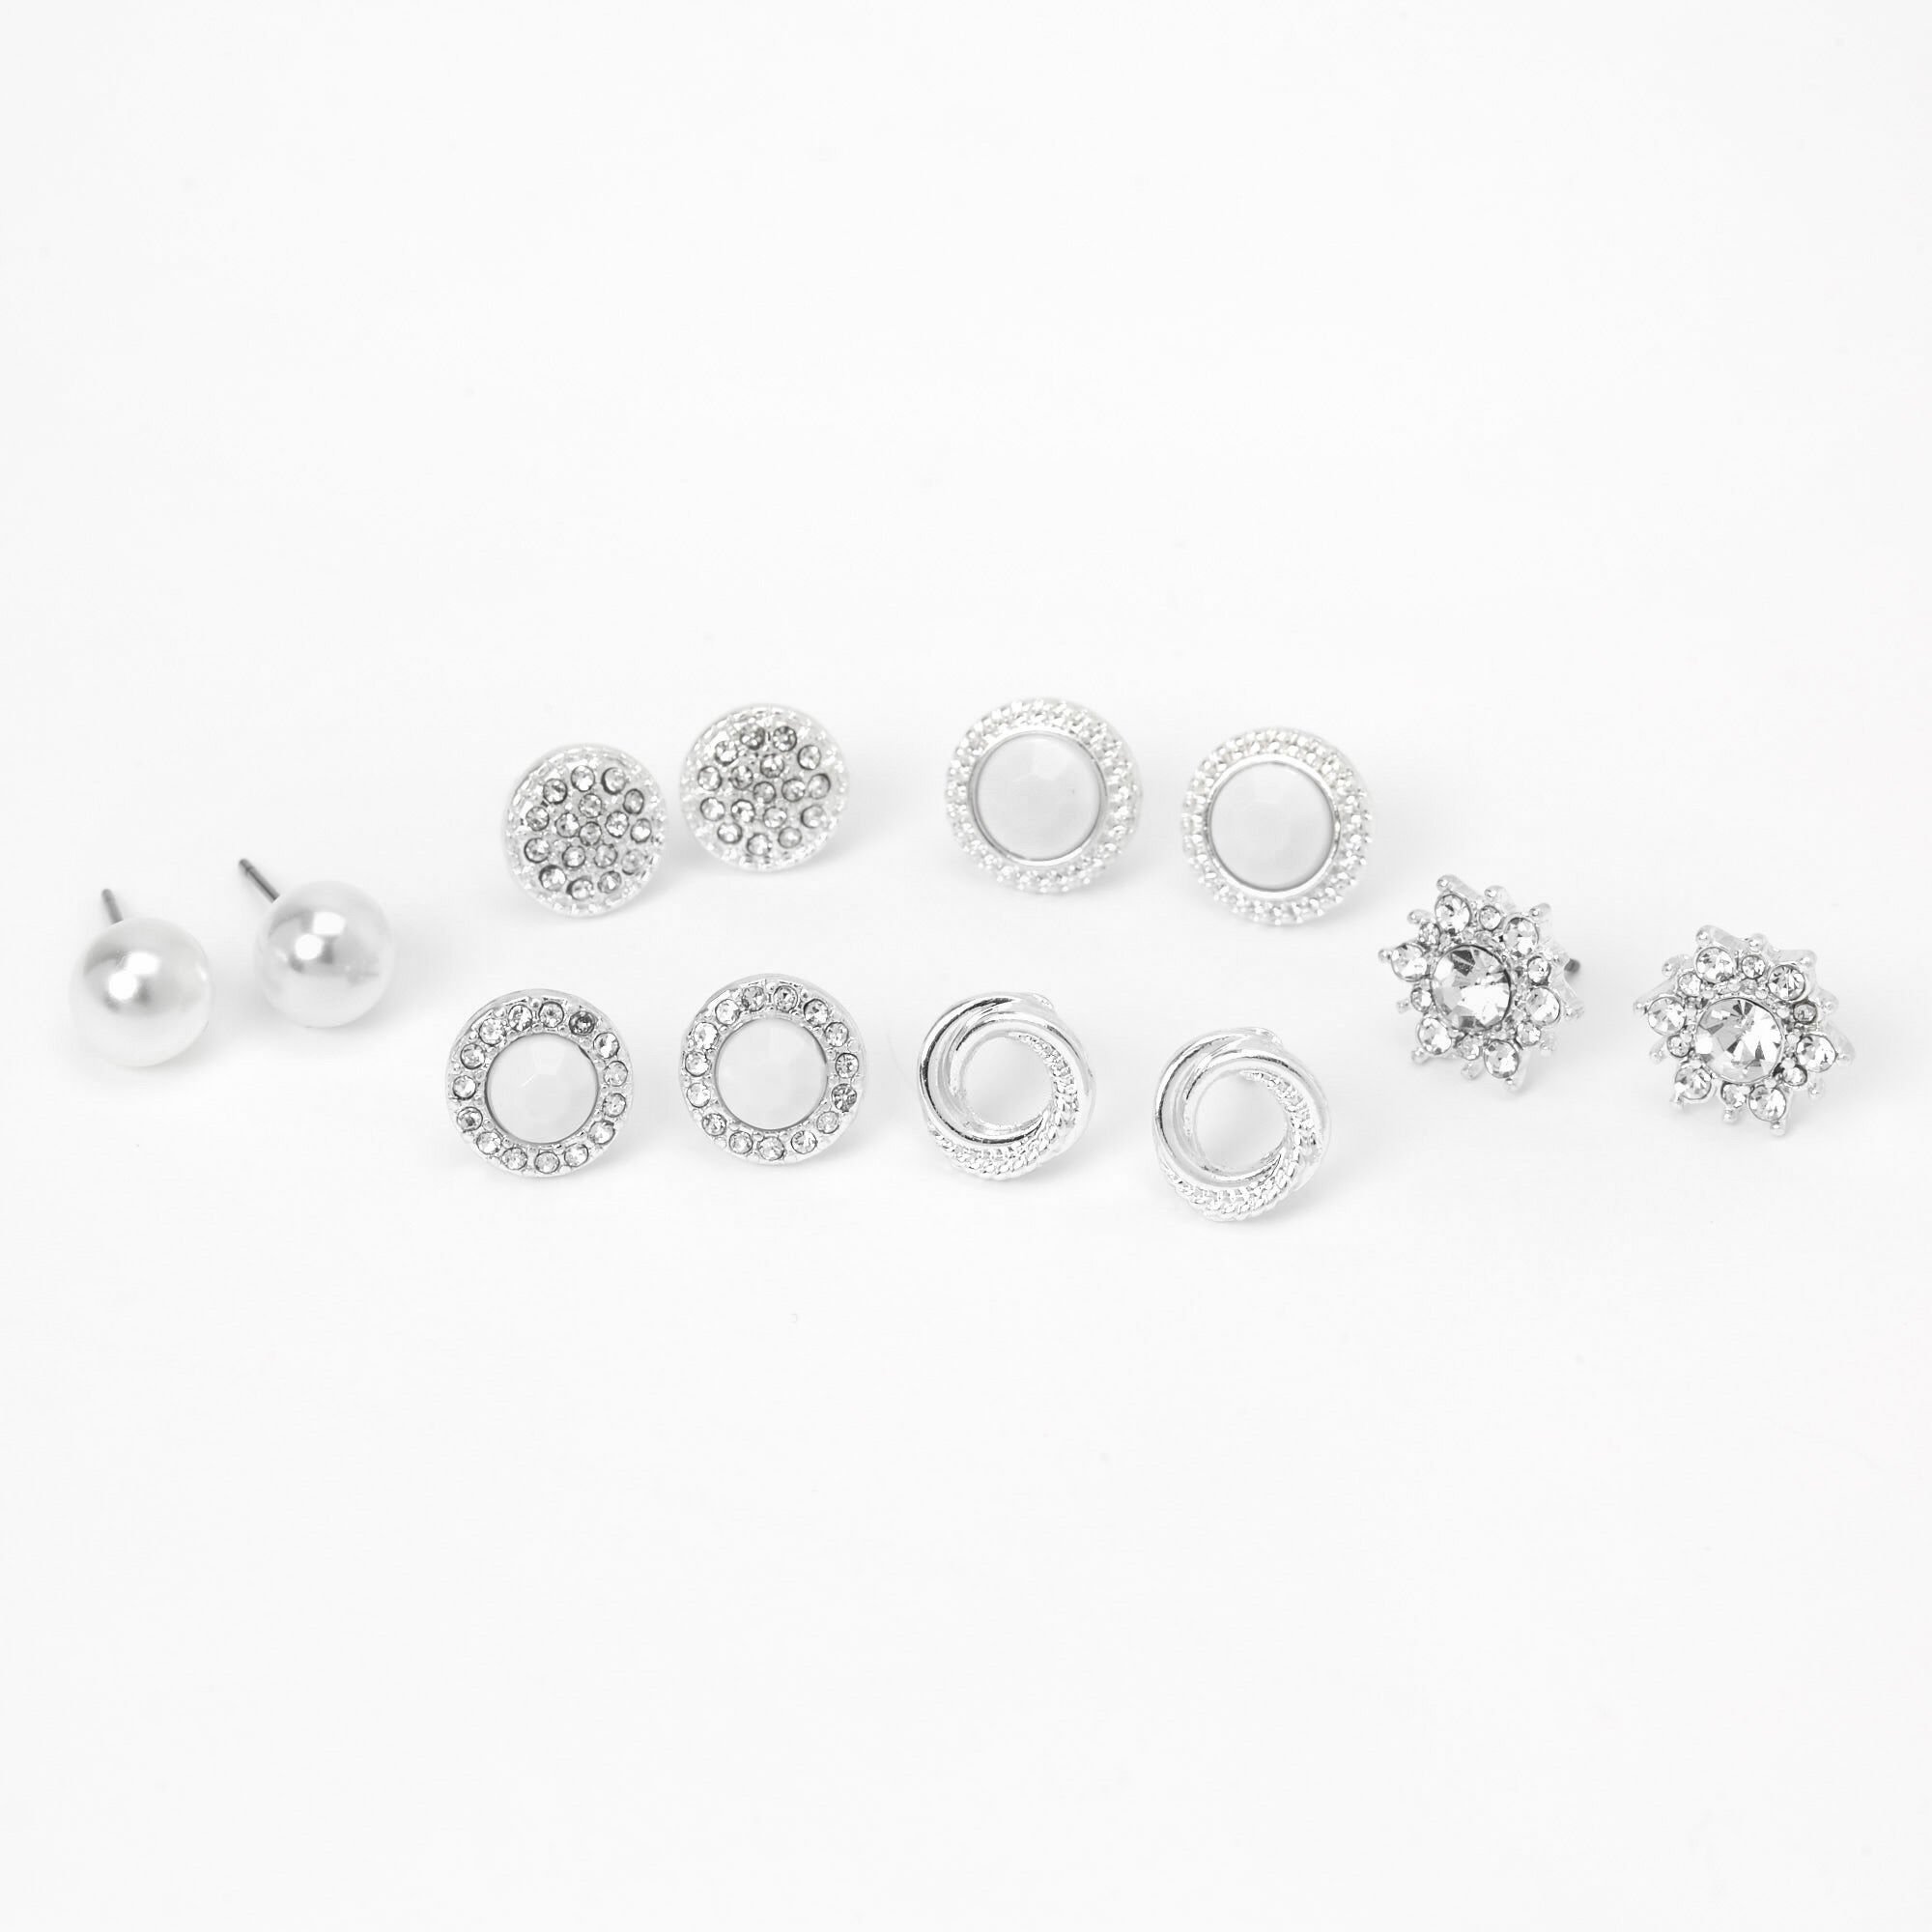 View Claires SilverTone Crystal Pearl Stud Earrings 6 Pack White information